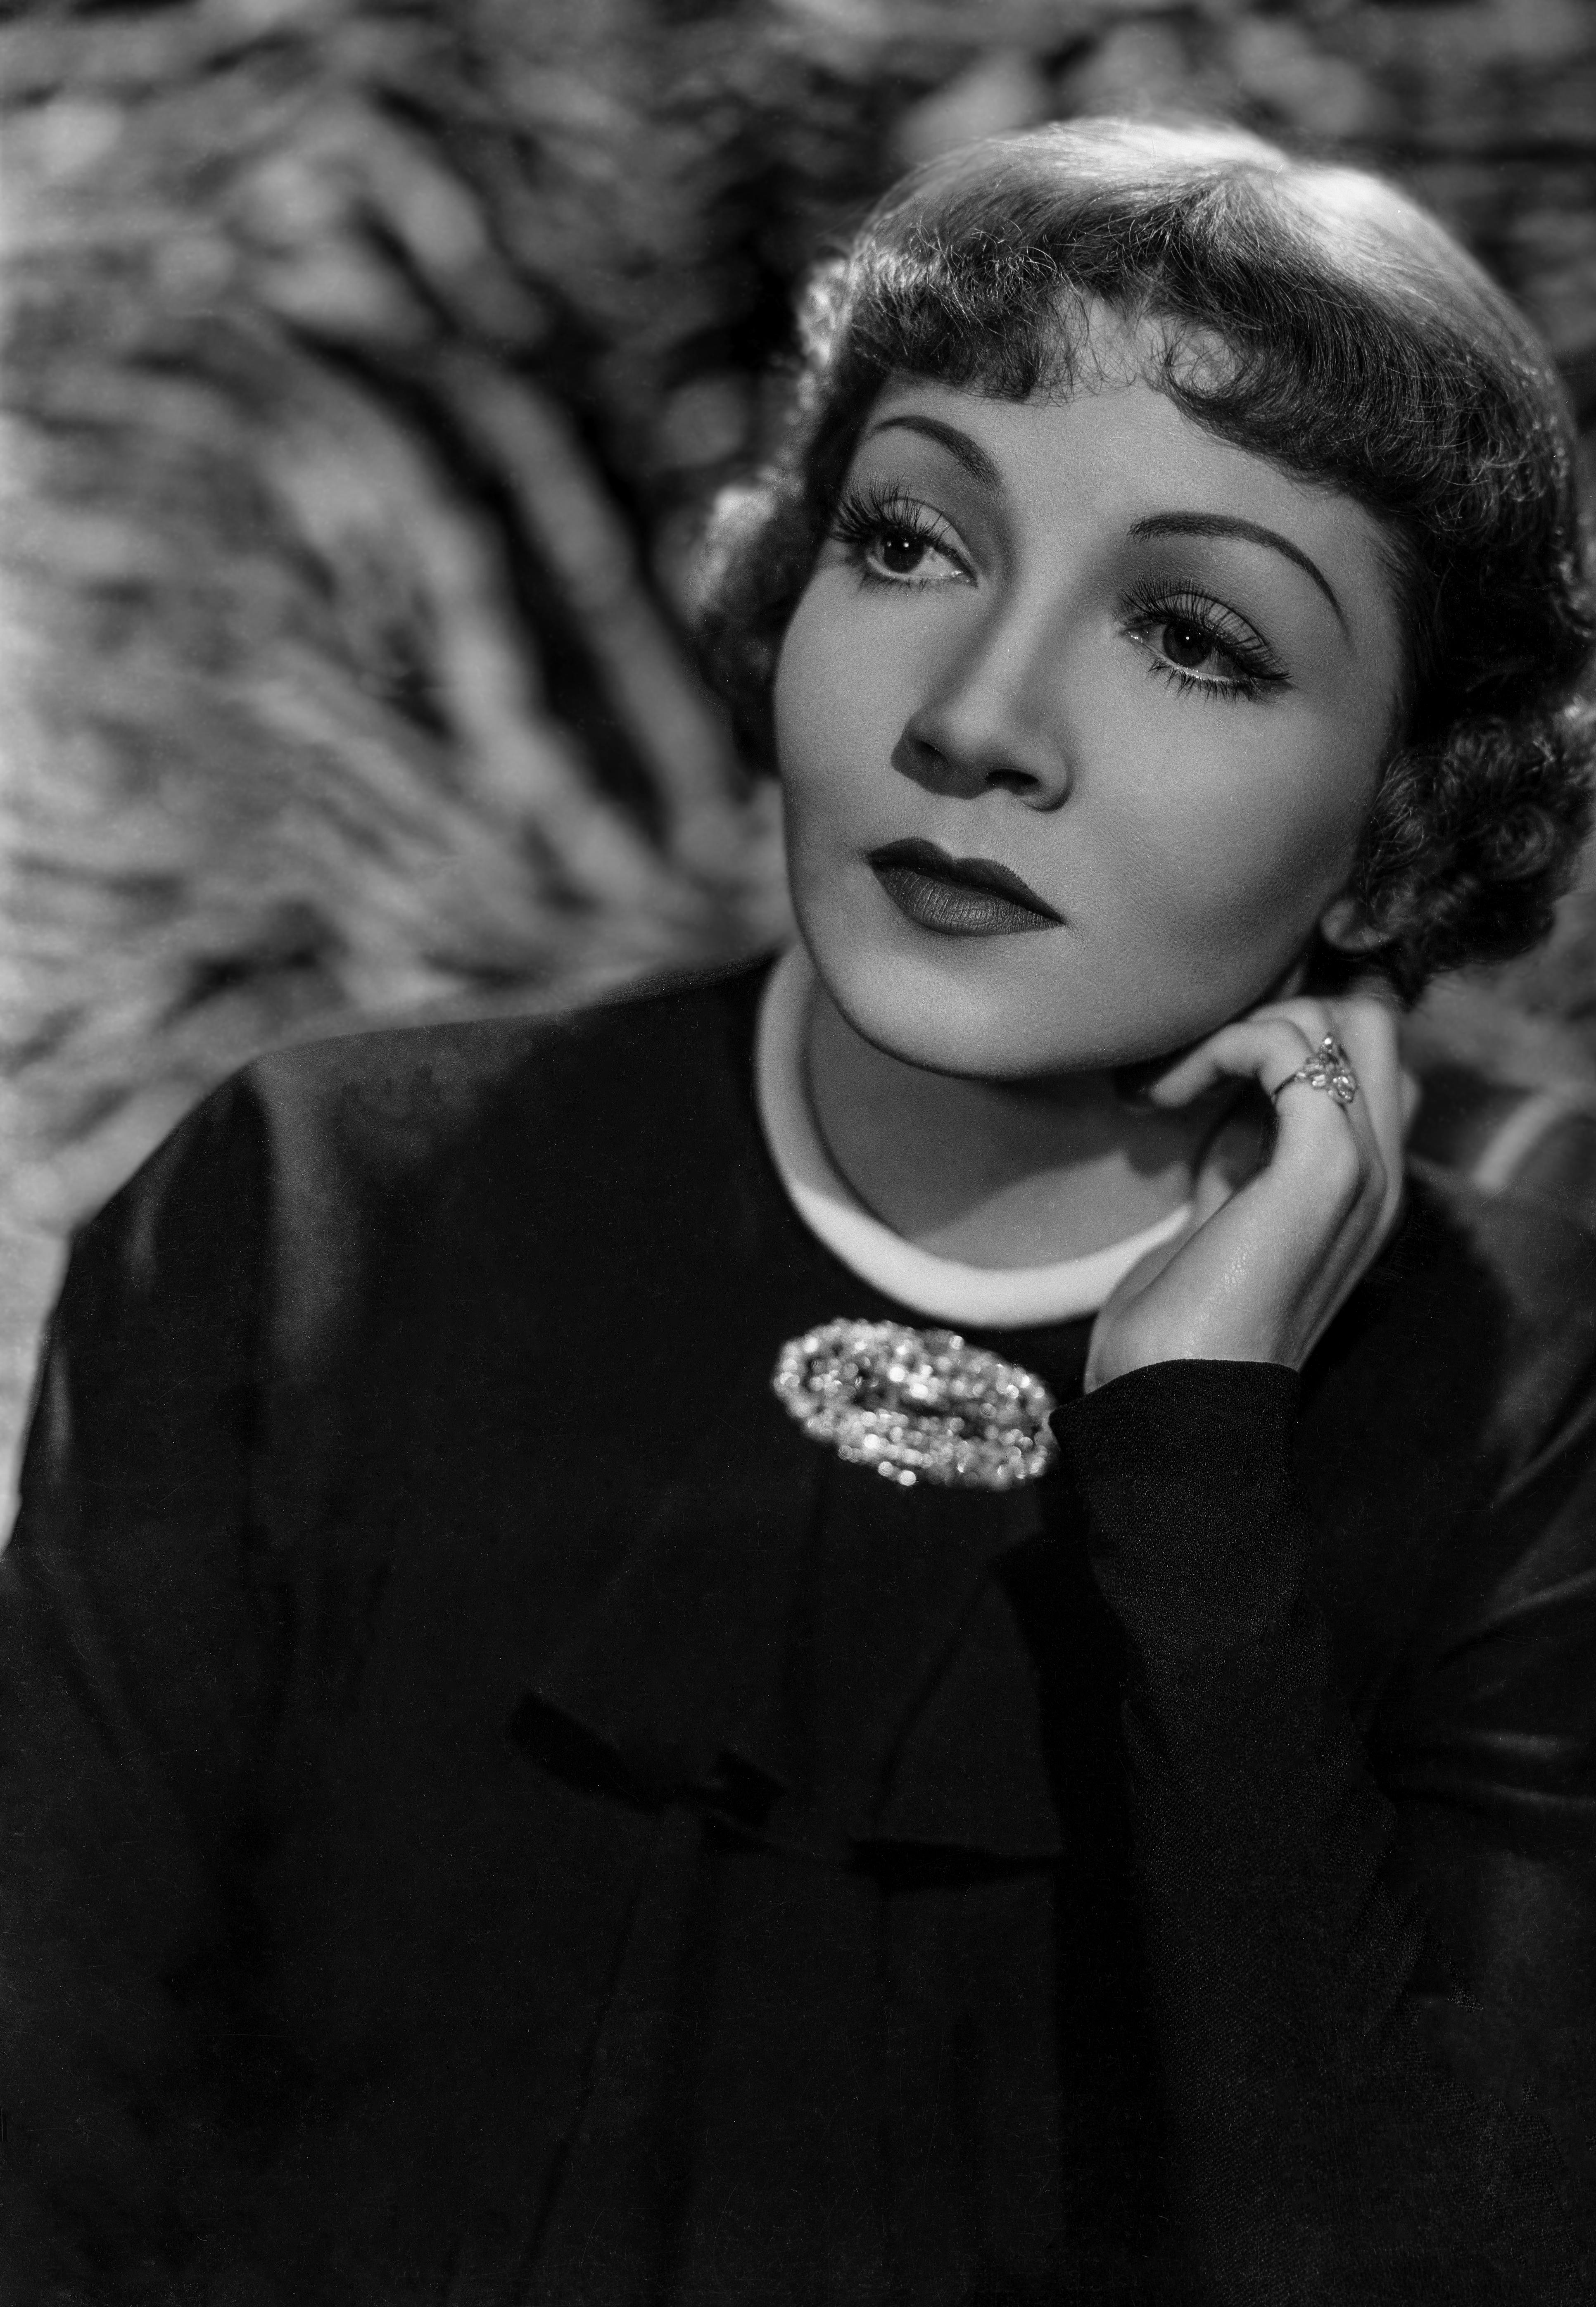 Stephen Walling Black and White Photograph - Claudette Colbert Deep in Thought Movie Star News Fine Art Print